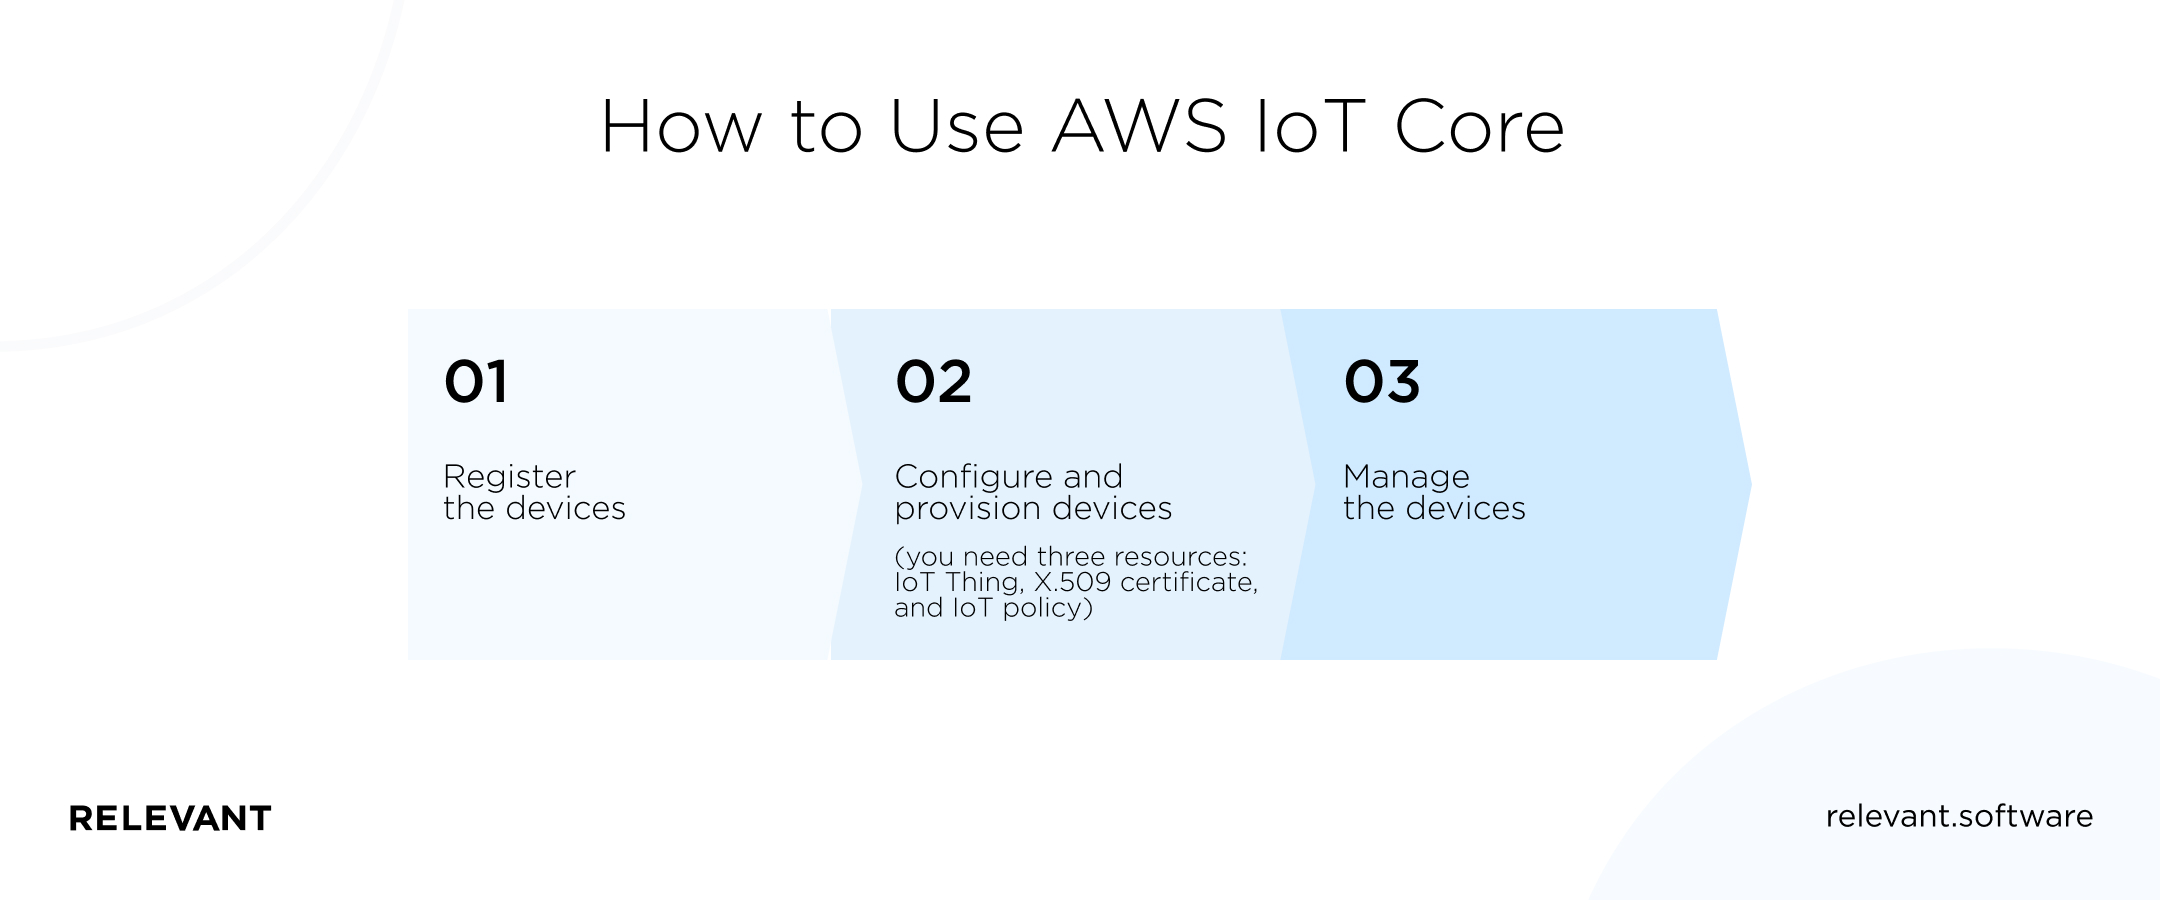 How to Use AWS IoT Core
